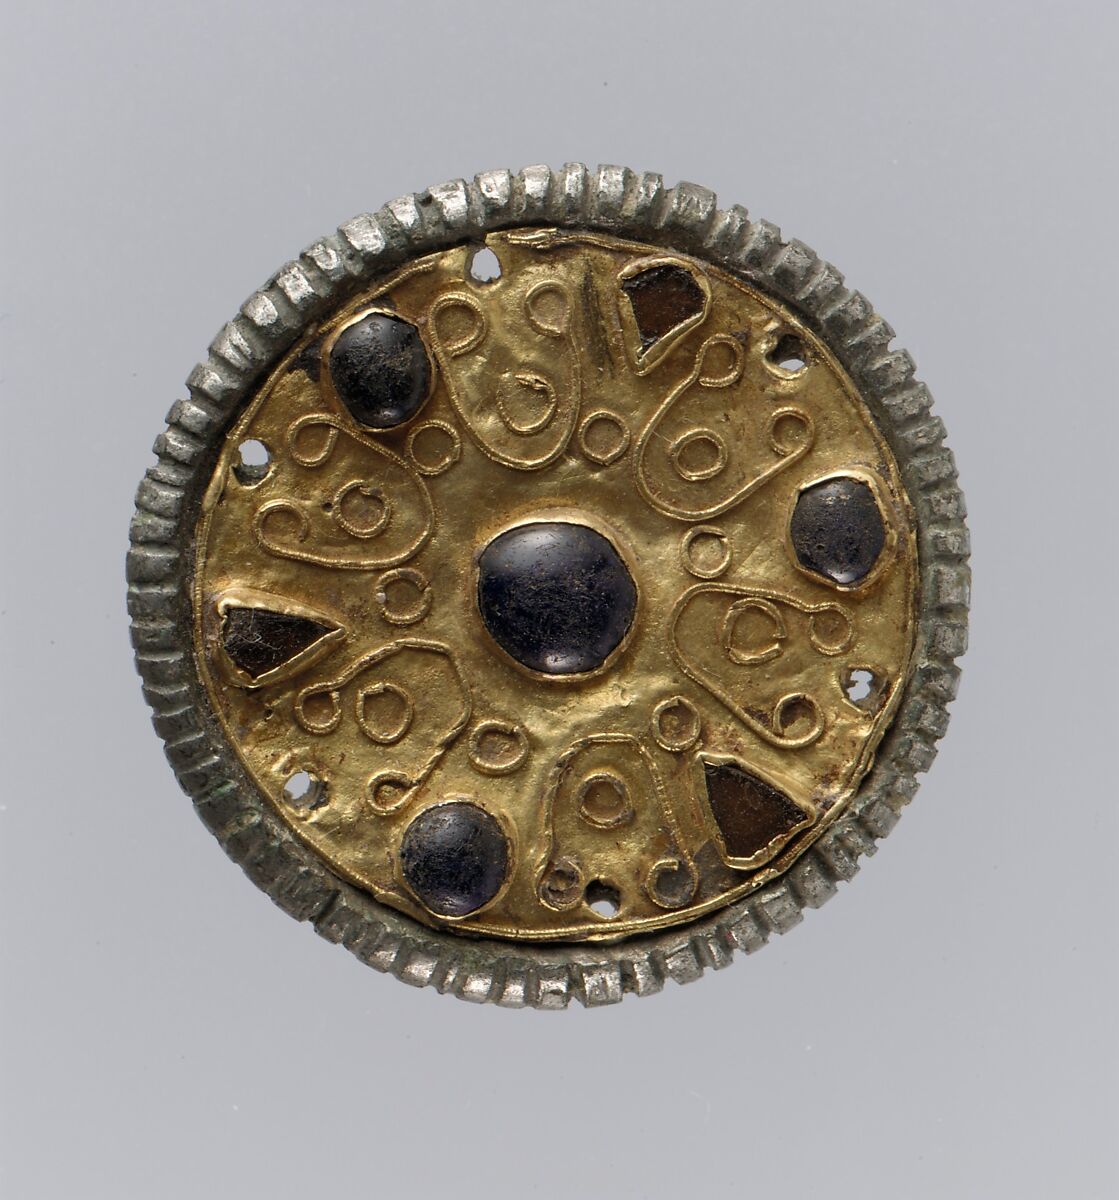 Disk Brooch, Gold, wire, glass paste cabochons, copper alloy core, tinned bronze, iron pin, Frankish 